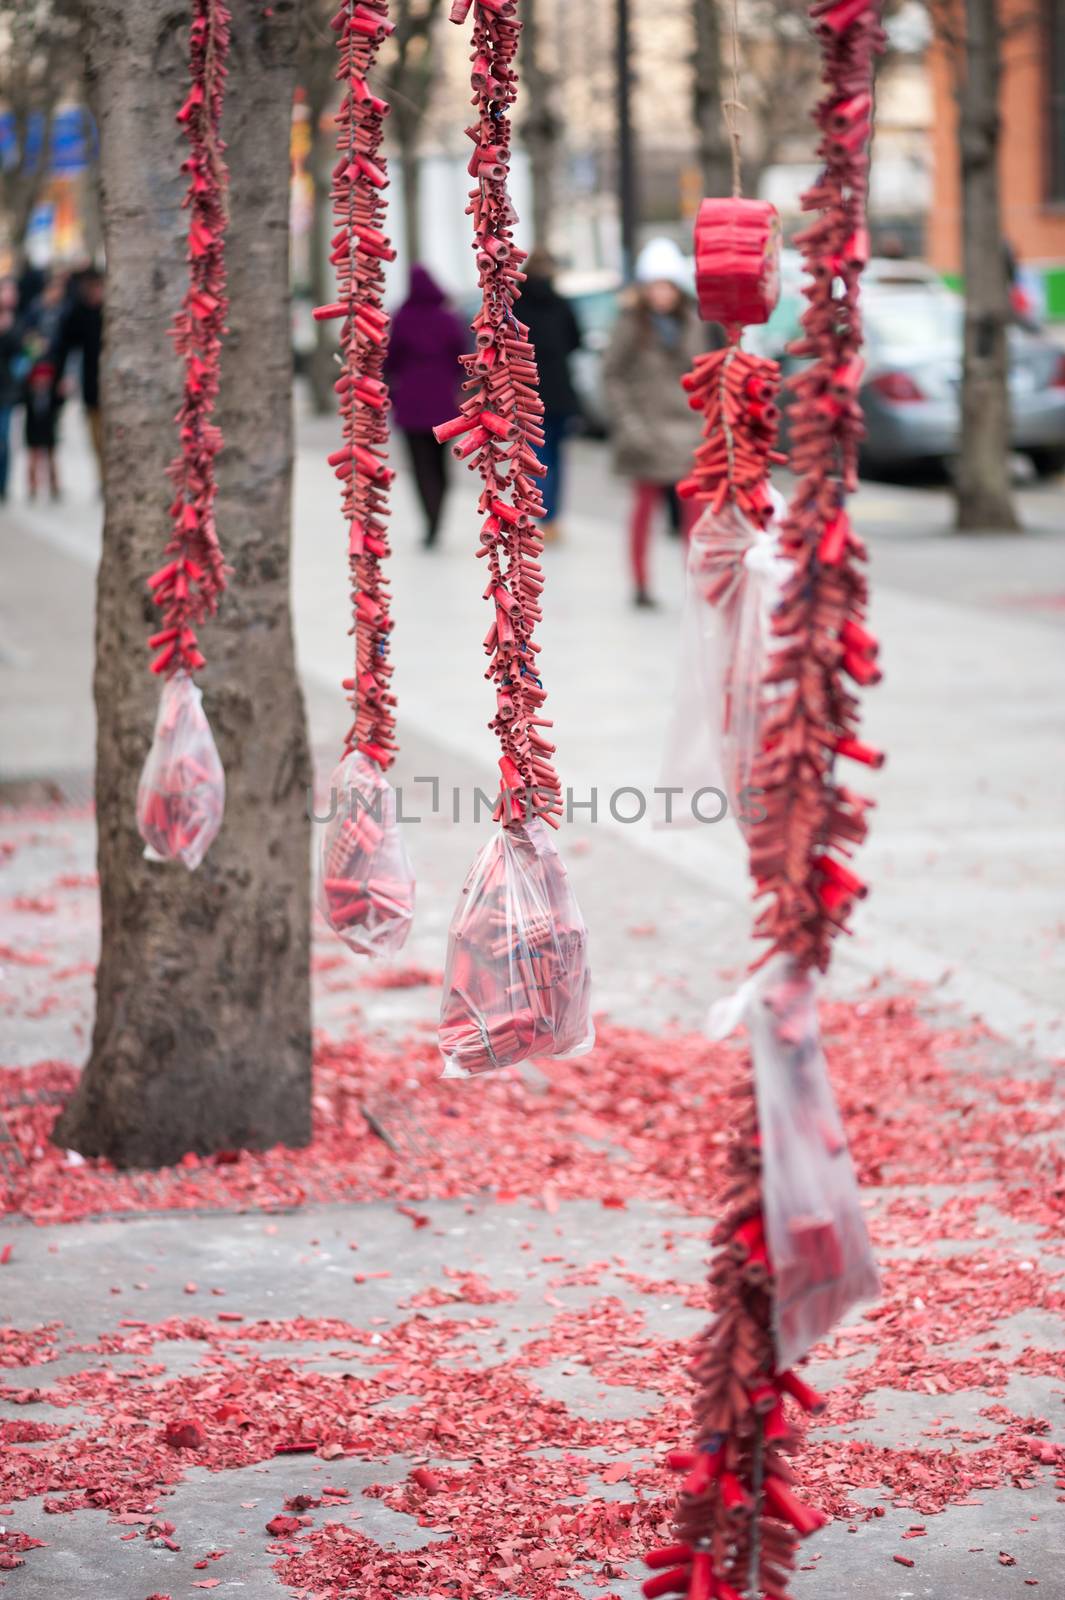 Red fire crackers stripes hanging on trees for the chinese new year